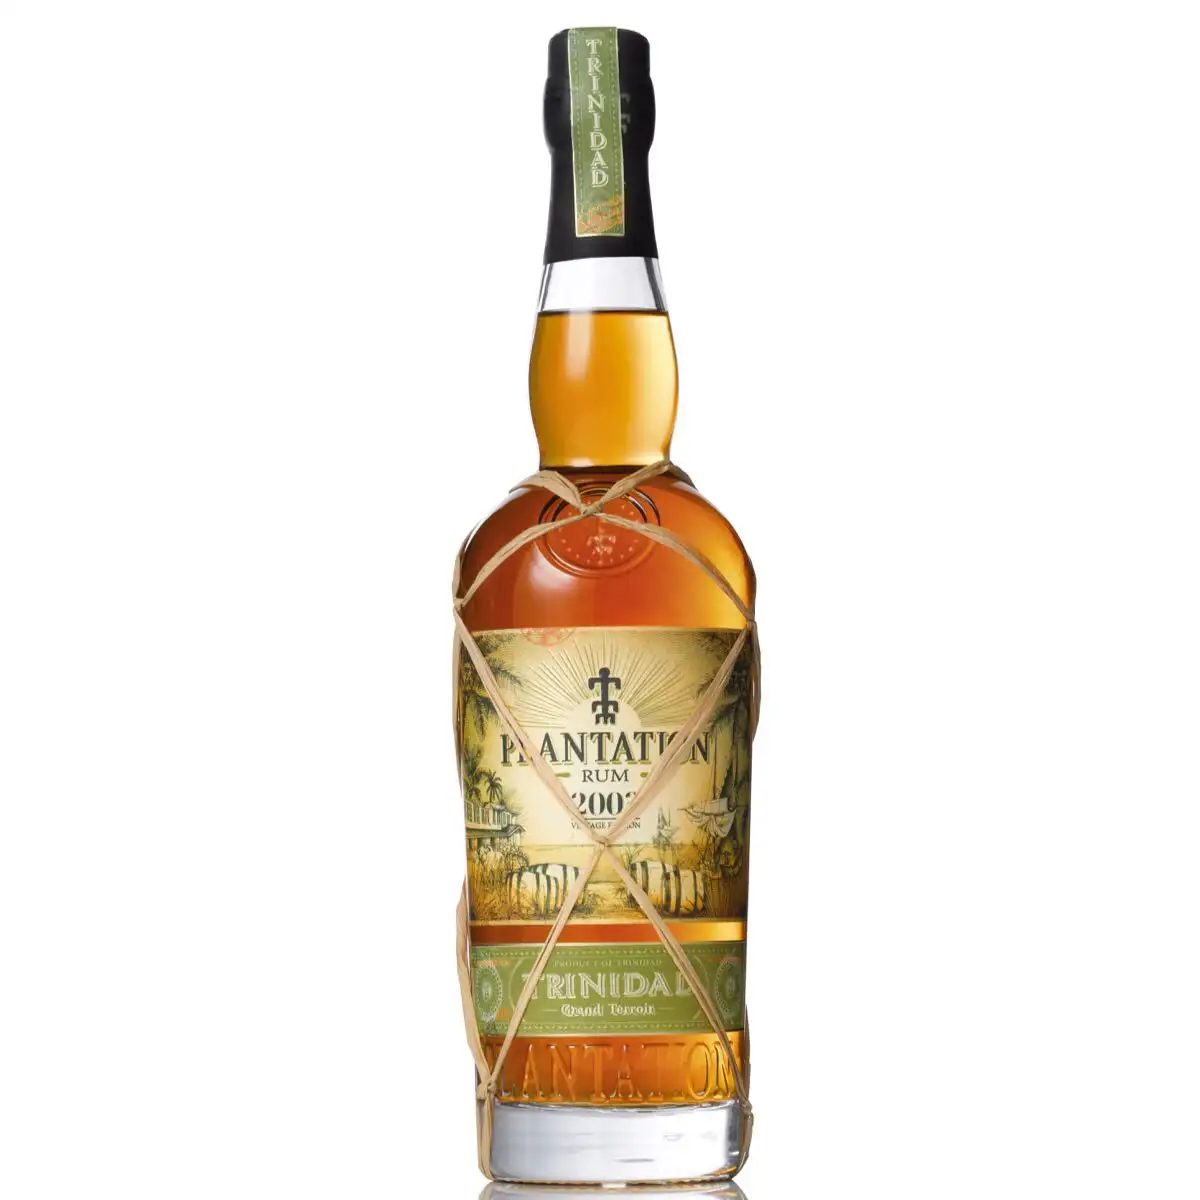 Image of the front of the bottle of the rum Plantation Trinidad